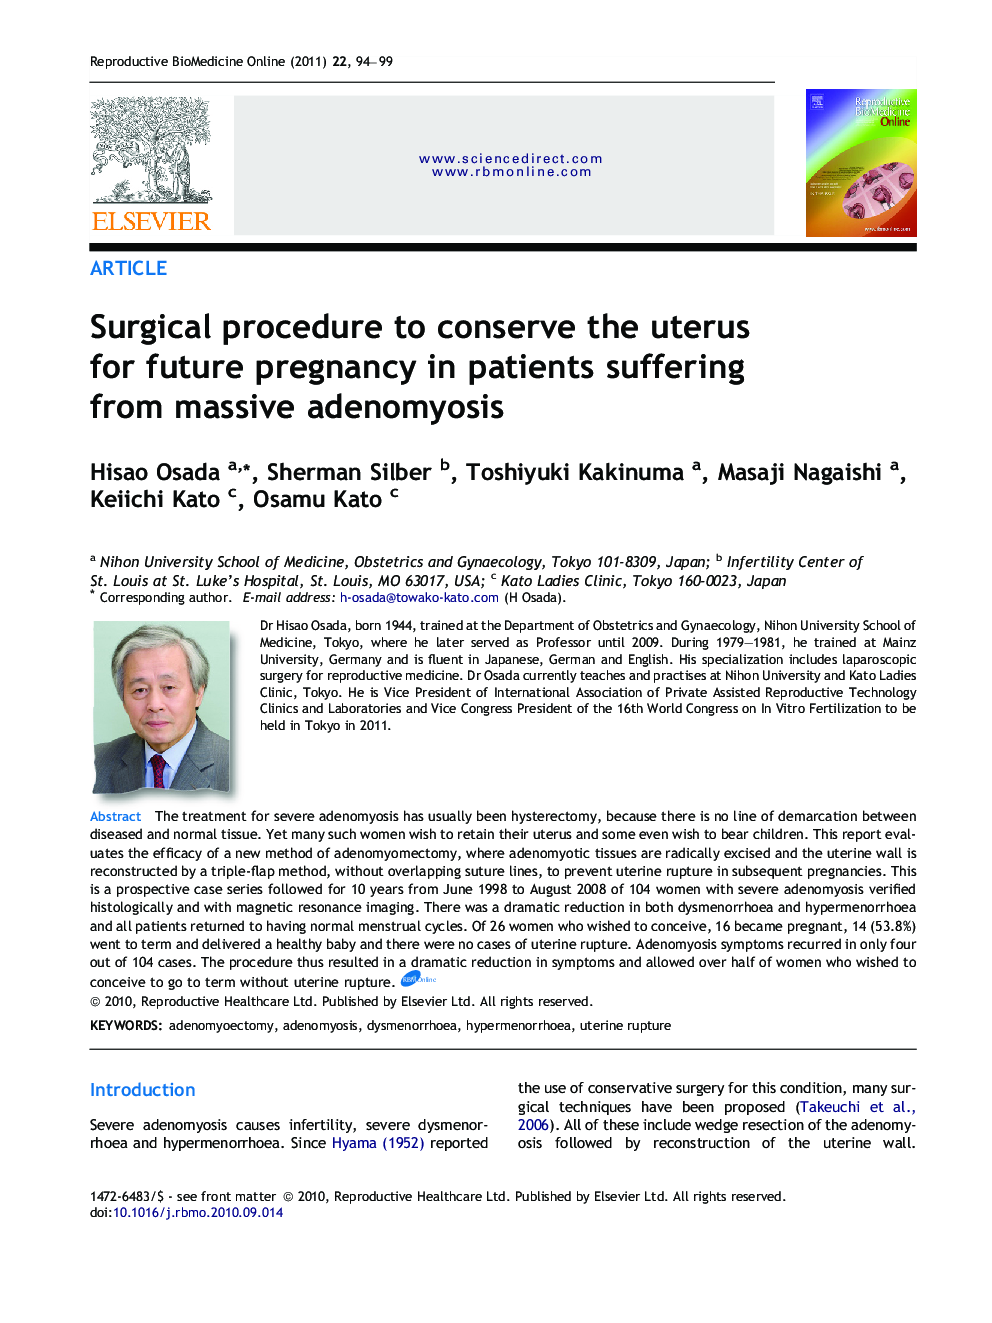 Surgical procedure to conserve the uterus for future pregnancy in patients suffering from massive adenomyosis 